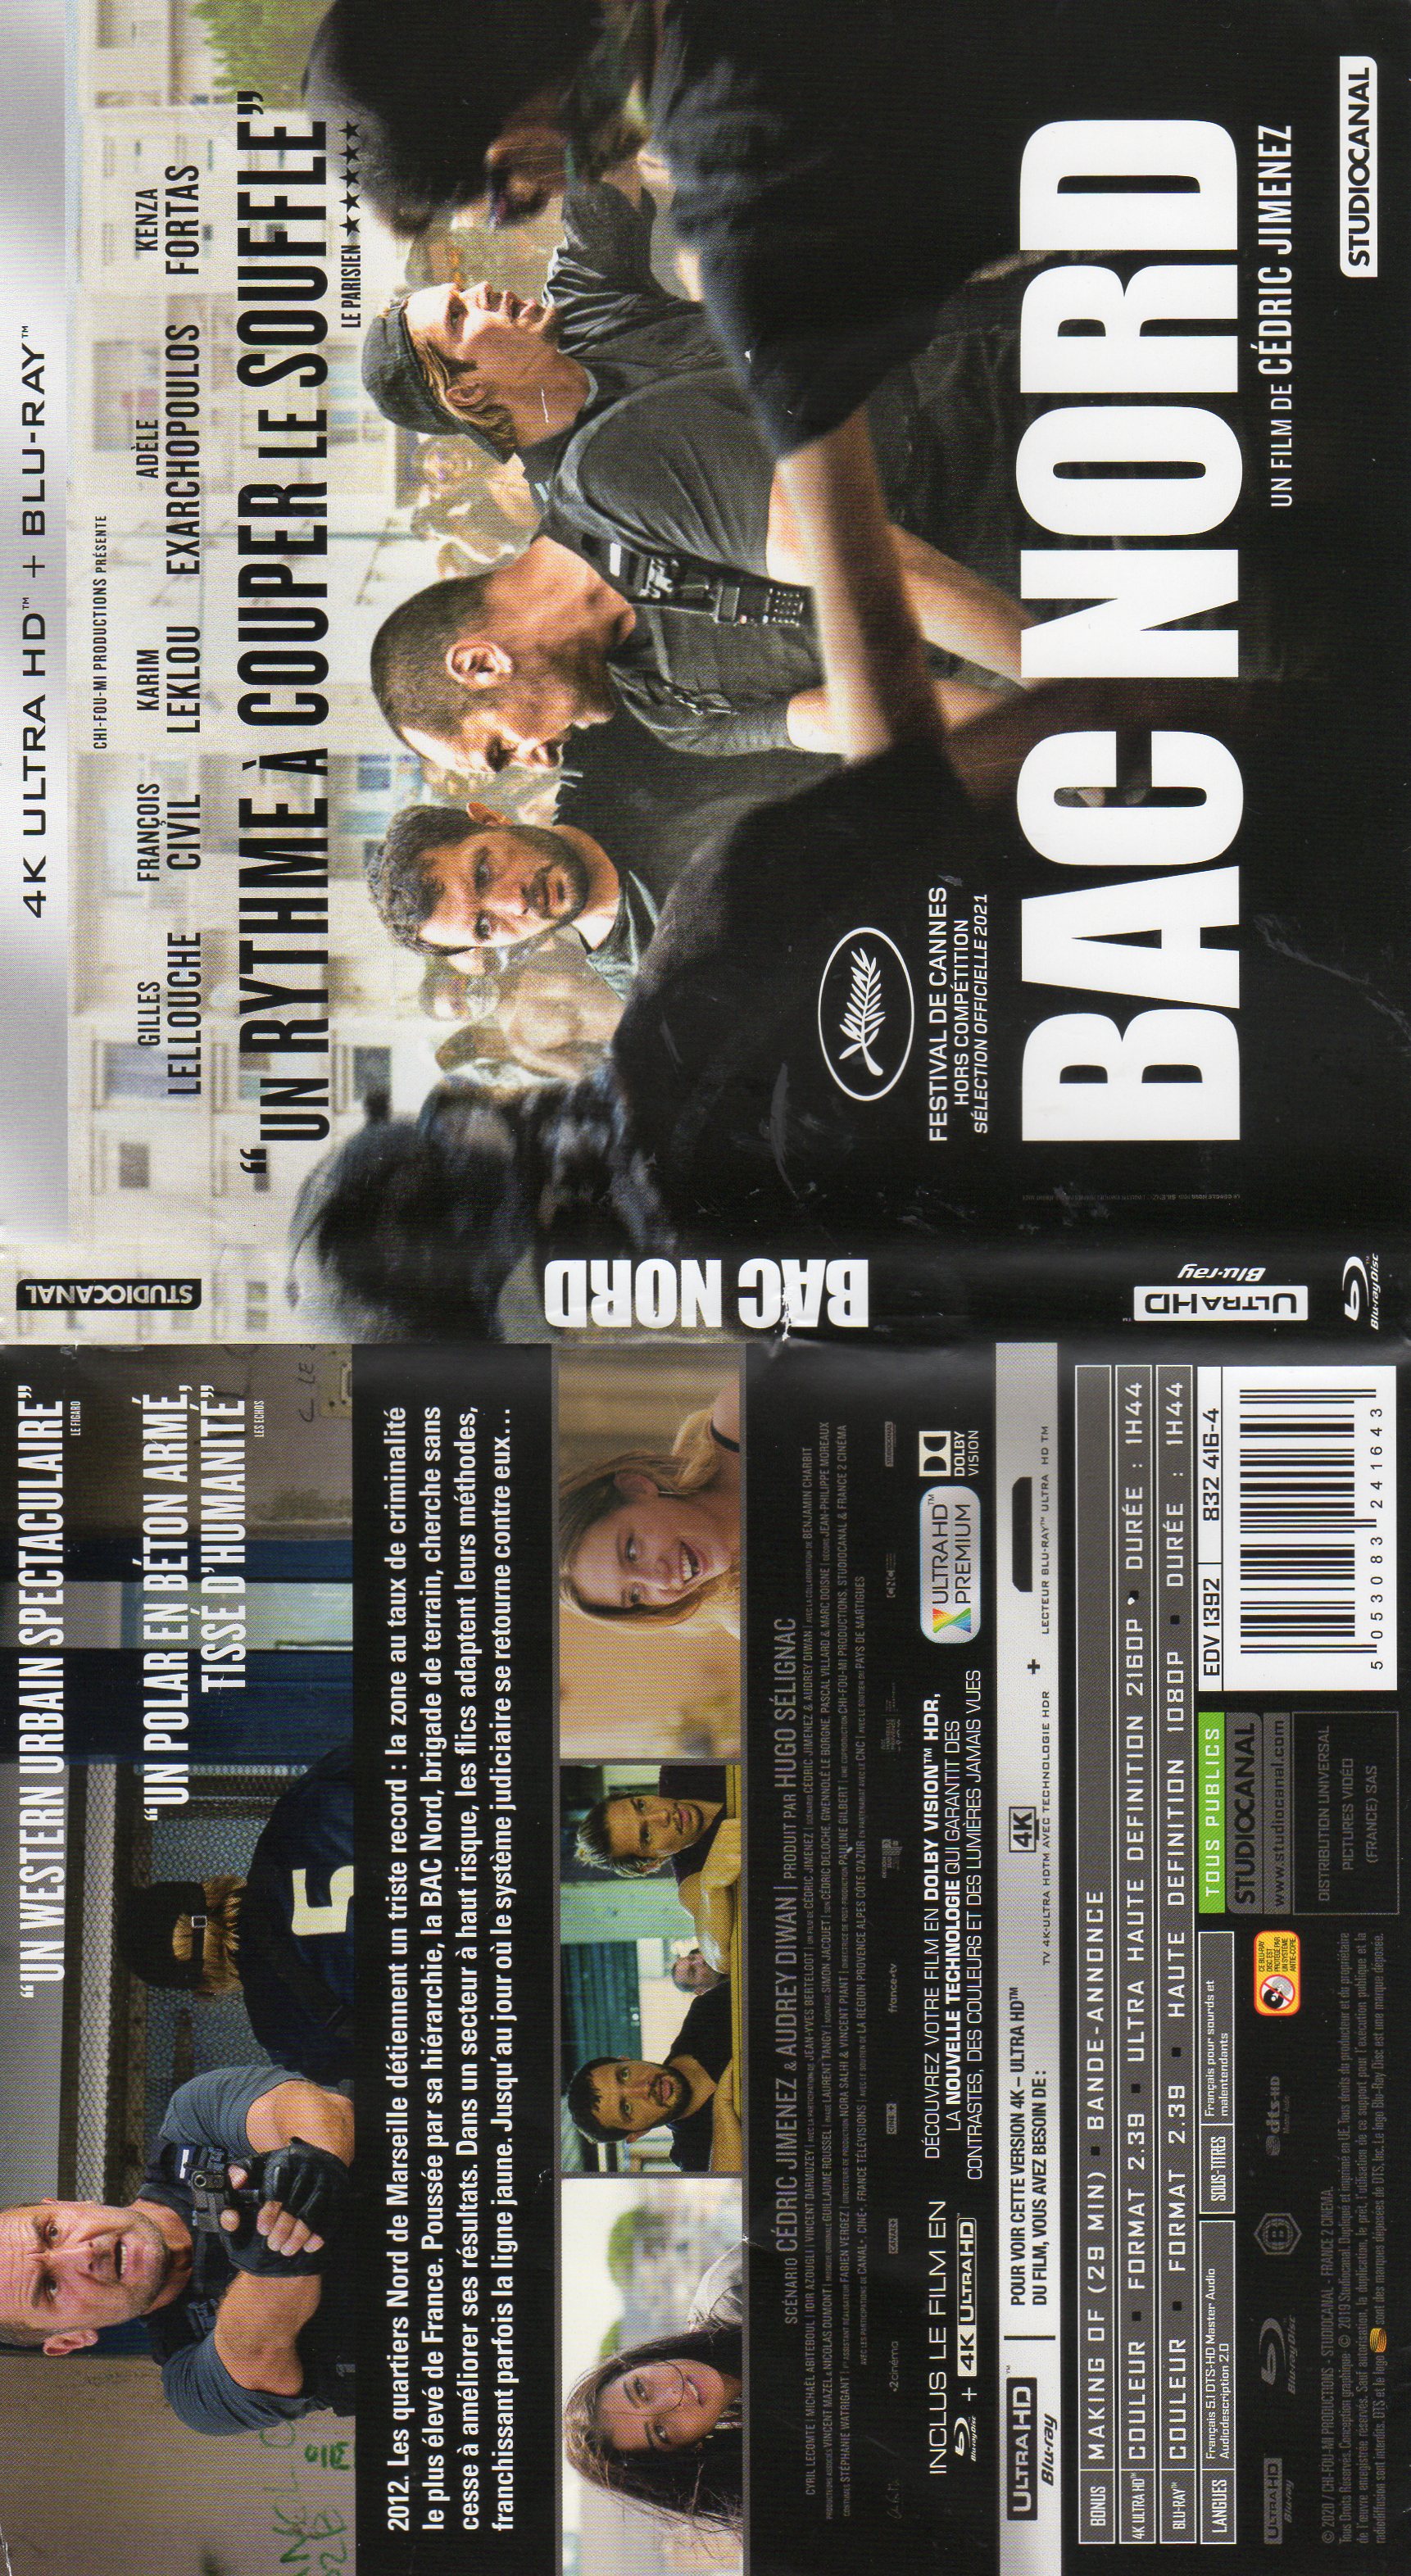 Jaquette DVD Bac Nord 4K (BLU-RAY)